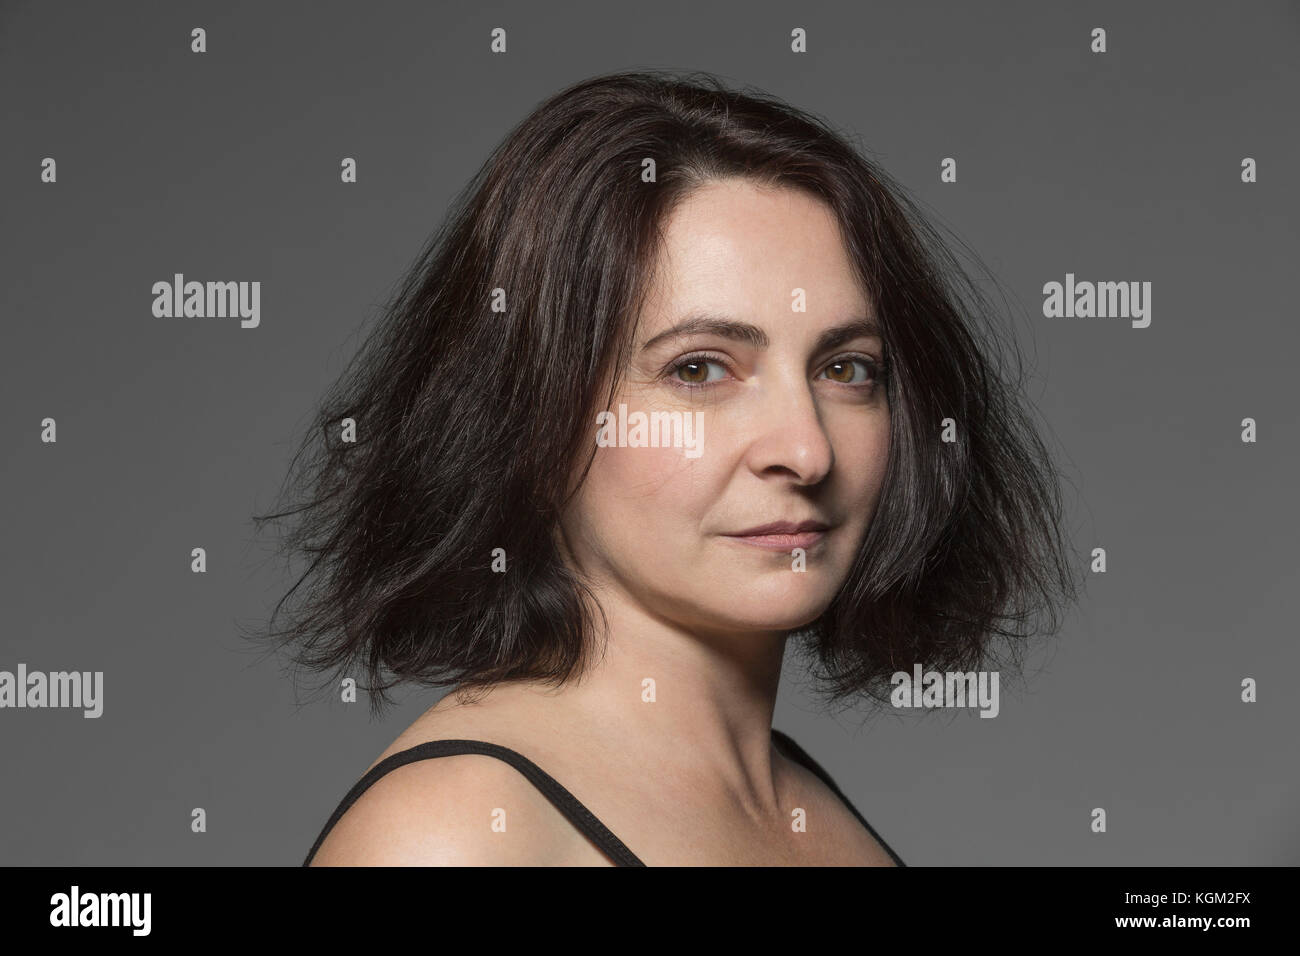 Close-up portrait of mature woman with short hair against gray background Stock Photo